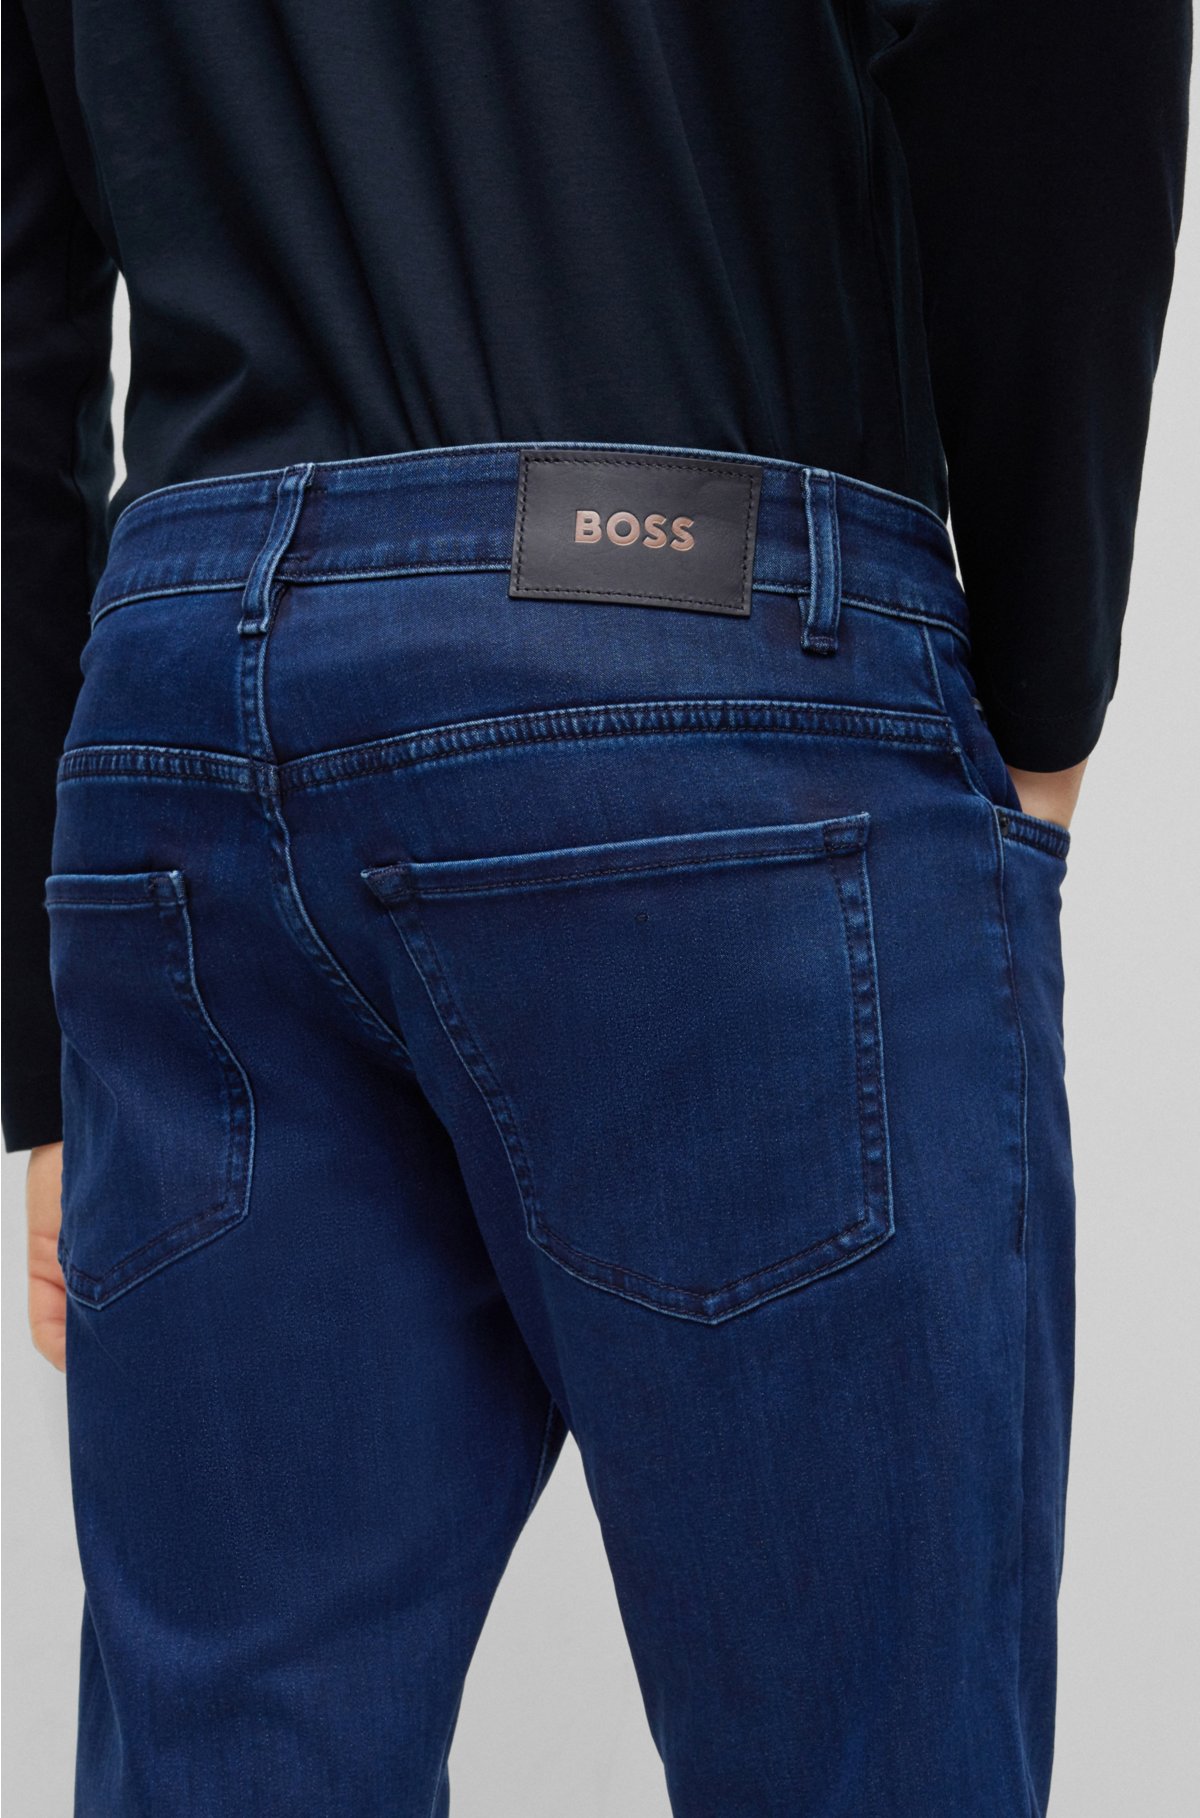 in satin-touch Slim-fit - BOSS denim blue jeans